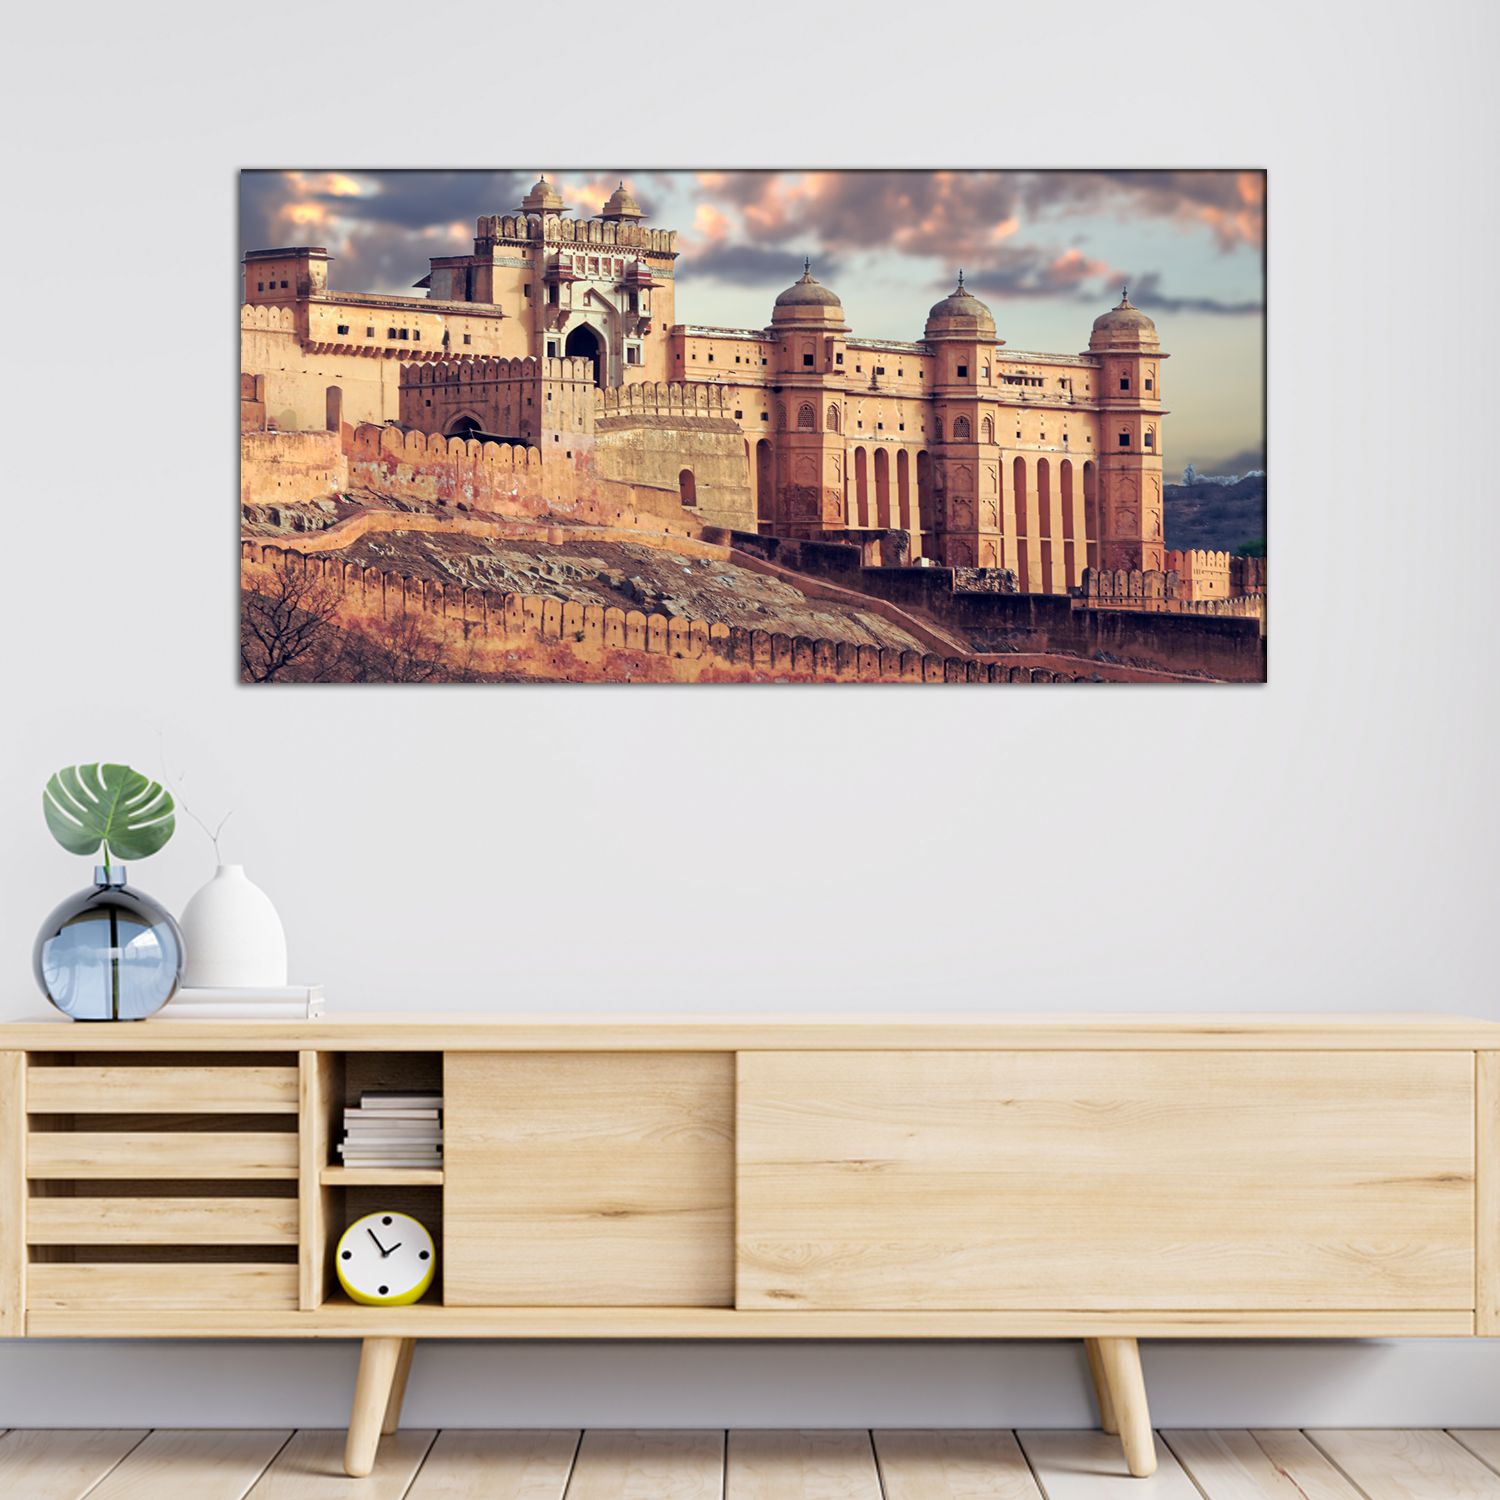 Amer fort Abstract Canvas Wall Painting